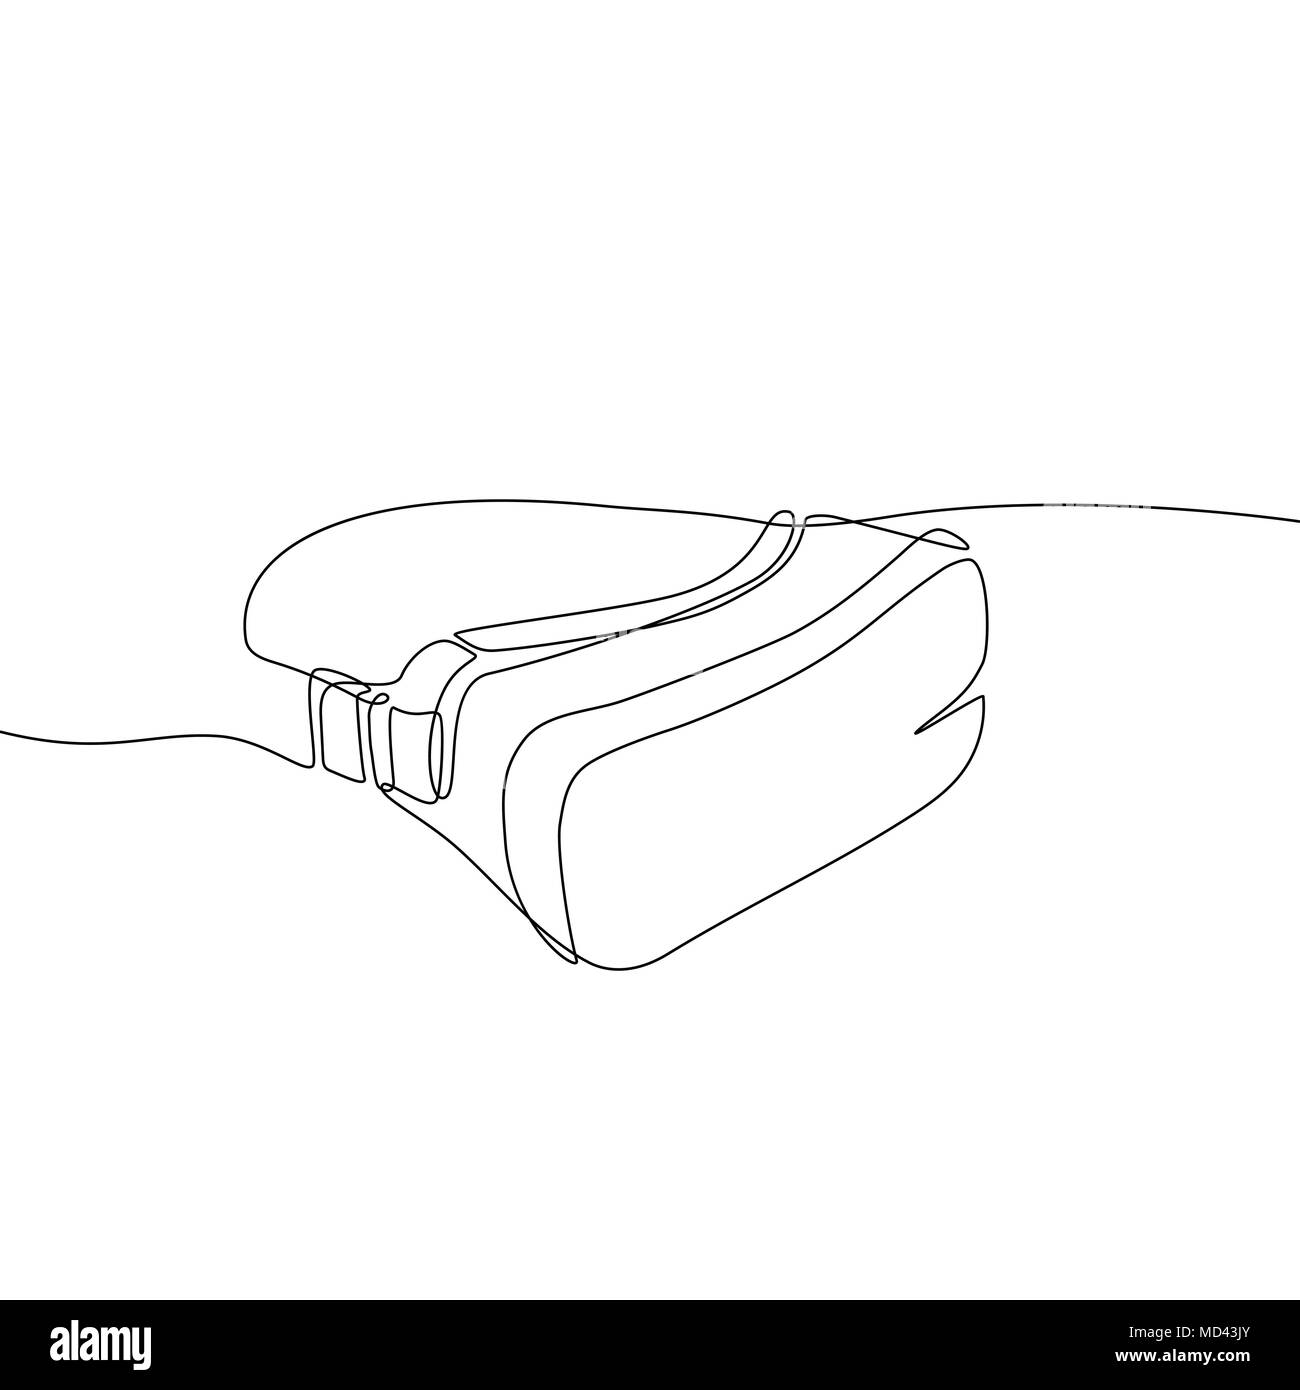 Virtual reality headset - one line design style illustration Stock Vector